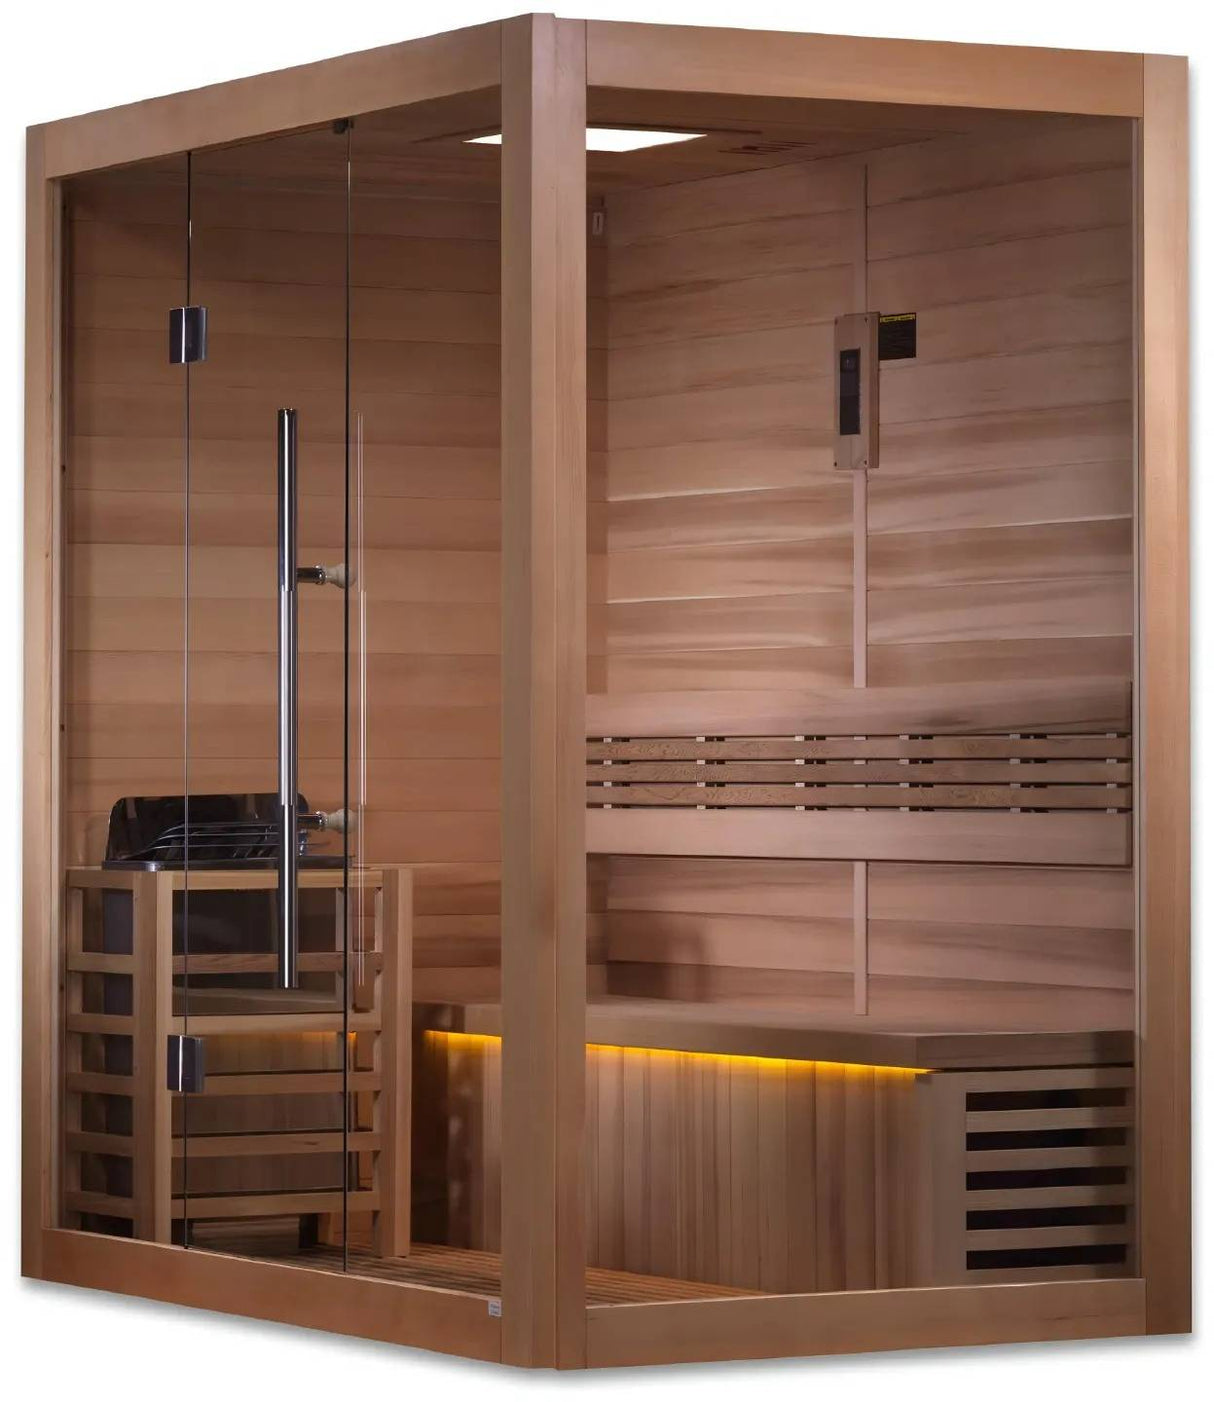 ZiahCare's Golden Designs Forssa 3 Person Traditional Sauna Mockup Image 3